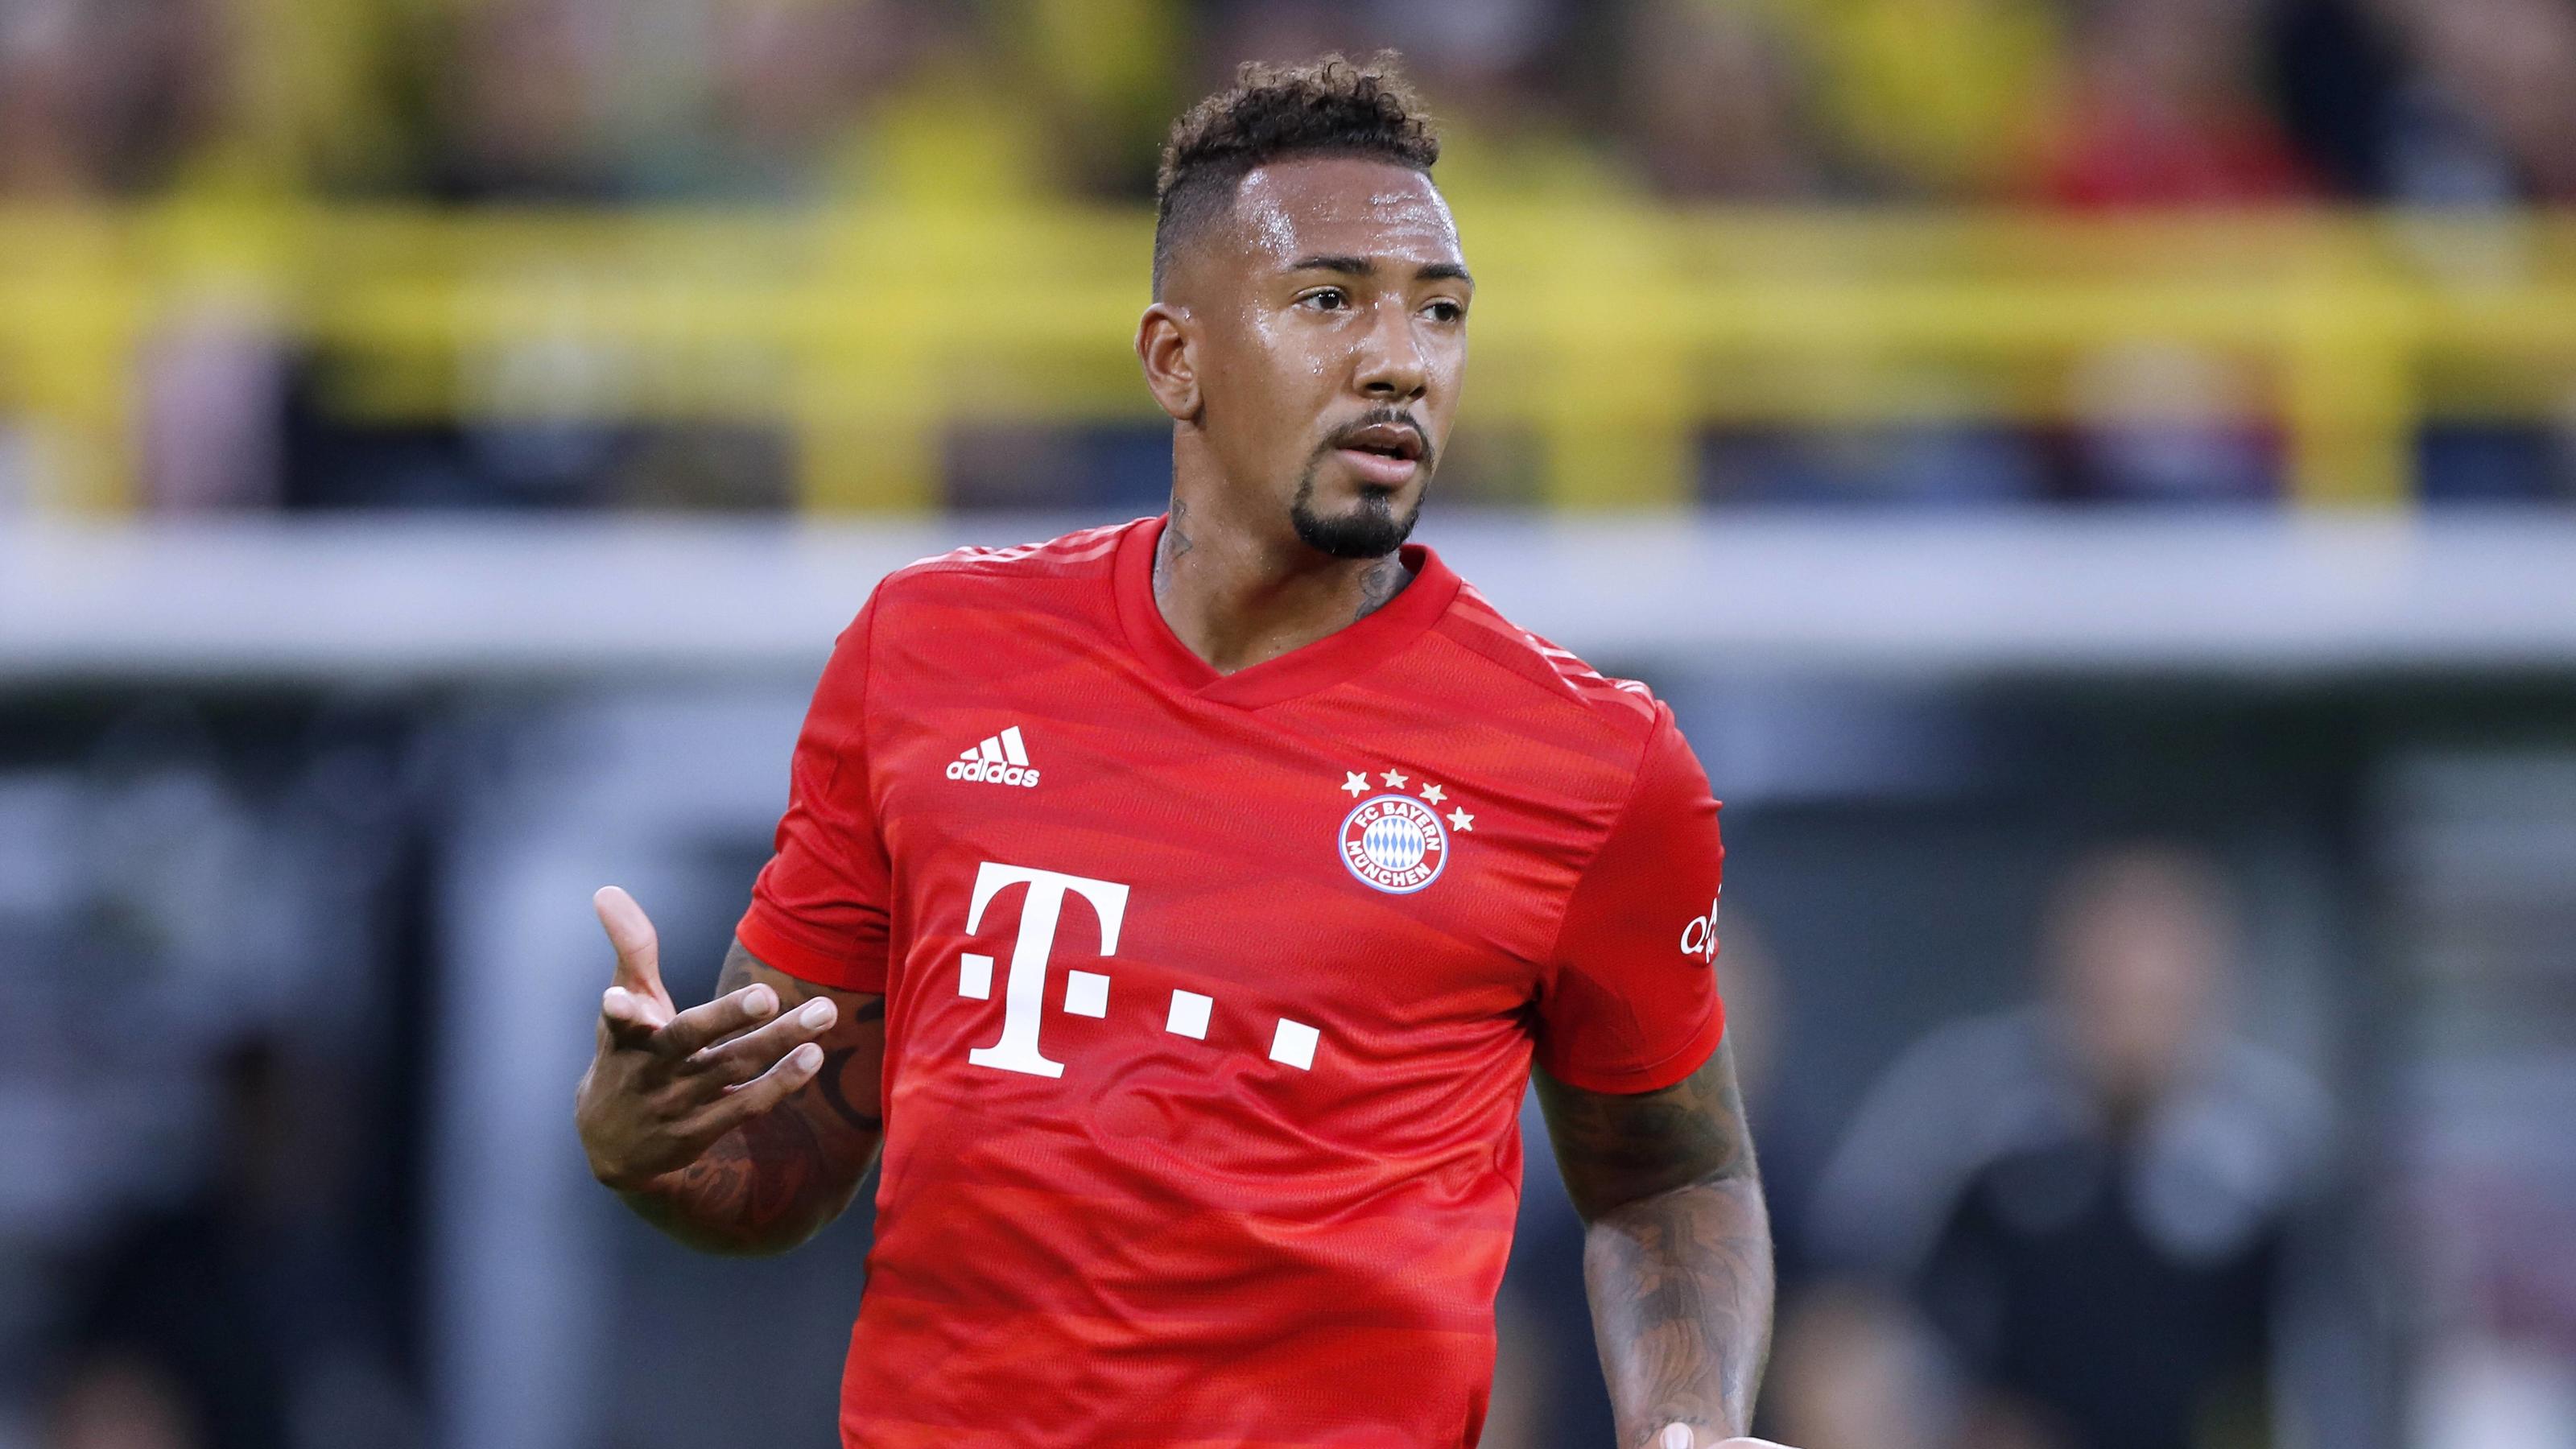 BOATENG Jerome Team FC Bayern Muenchen Supercup Finale BVB-FC Bayern Muenchen 2 : 0 DFL Saison 2019-2020 am 03.08.2019 in Dortmund DFL REGULATIONS PROHIBIT ANY USE OF PHOTOGRAPHS as IMAGE SEQUENCES and/or QUASI-VIDEO *** BOATENG Jerome Team FC Bayern